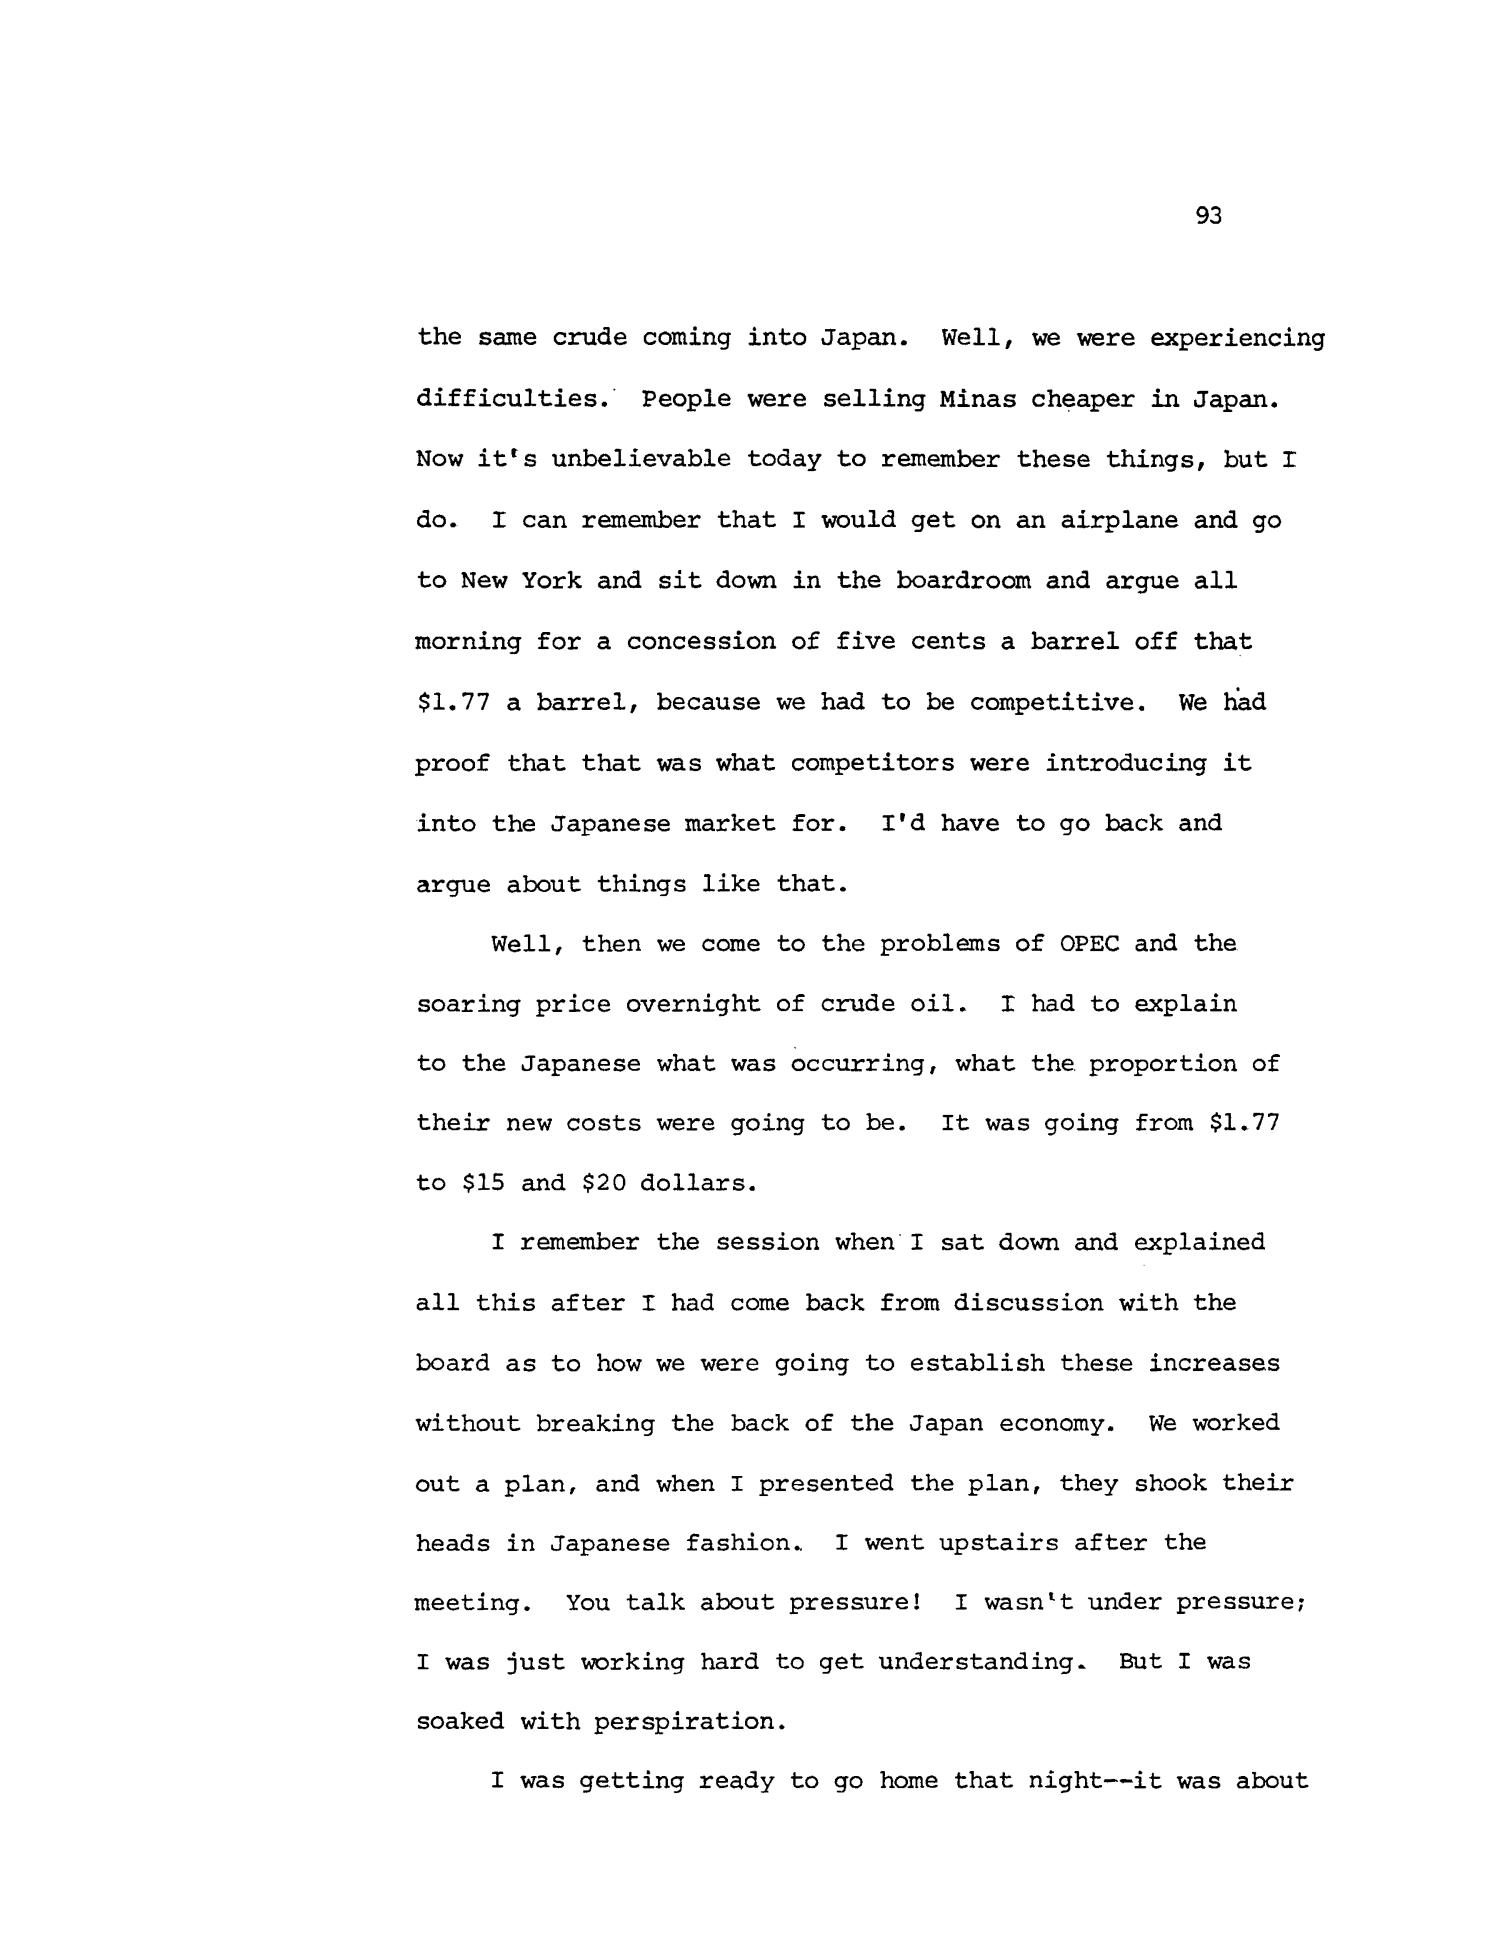 Oral History Interview with Stephen E. Van Nostrand, April 20, 1987
                                                
                                                    93
                                                